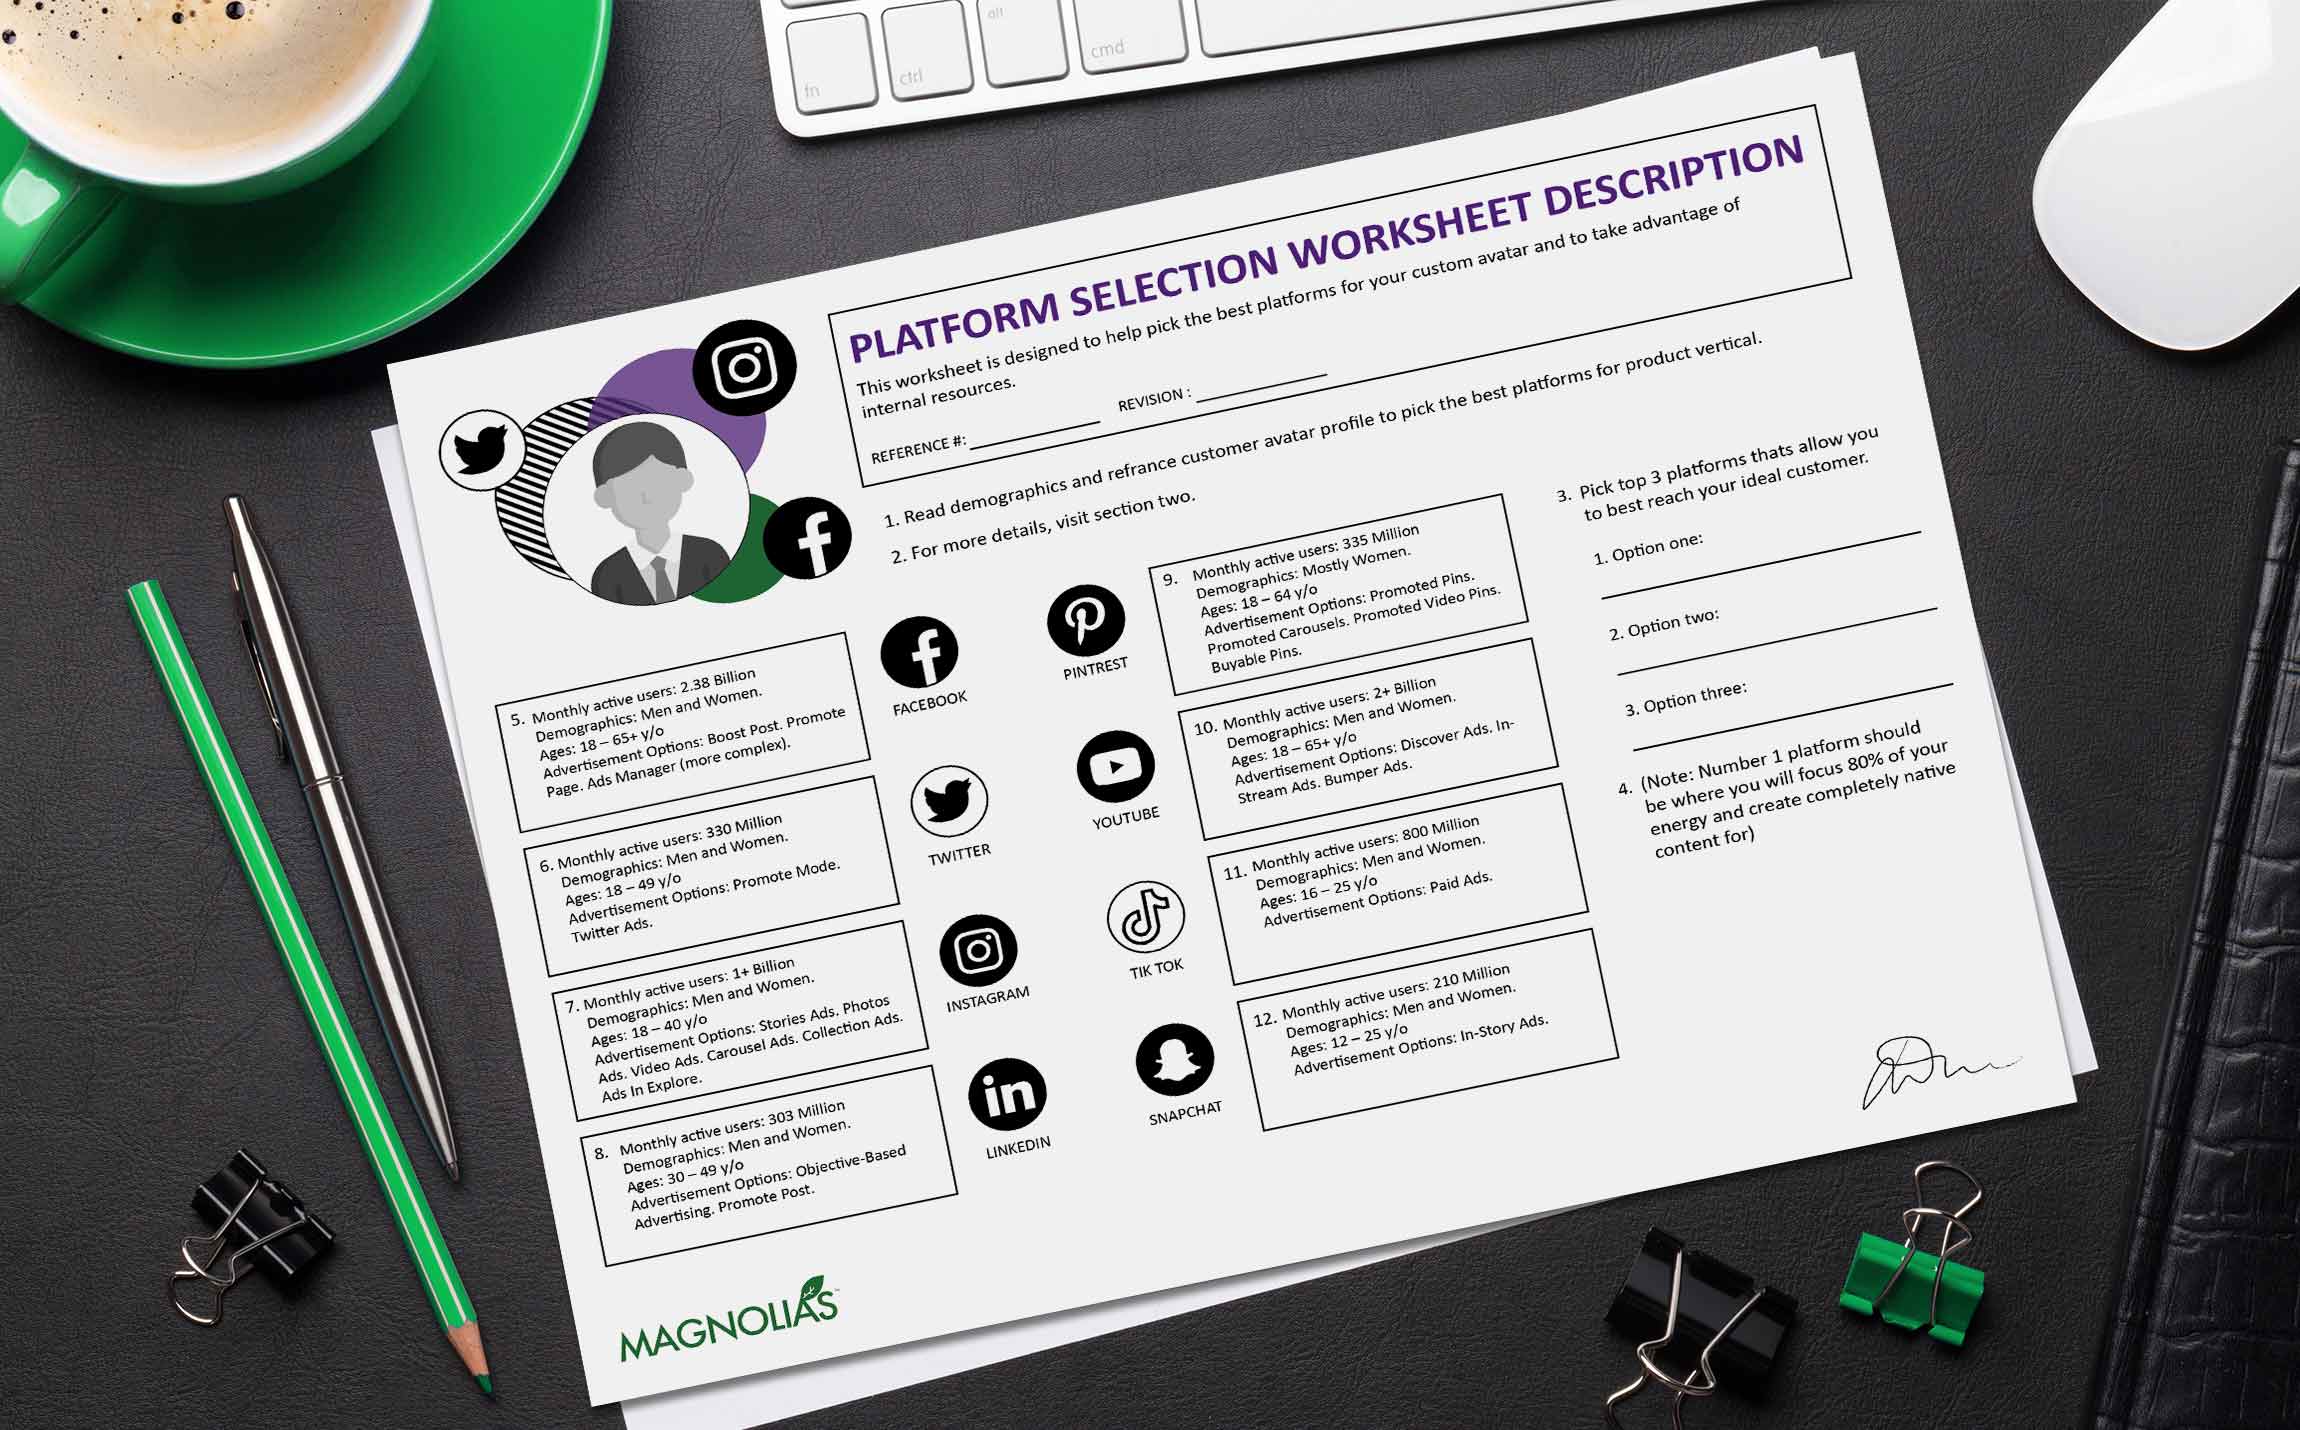 Be present on social media platforms that relate to your customer avatars with this free social media platform selection worksheet.